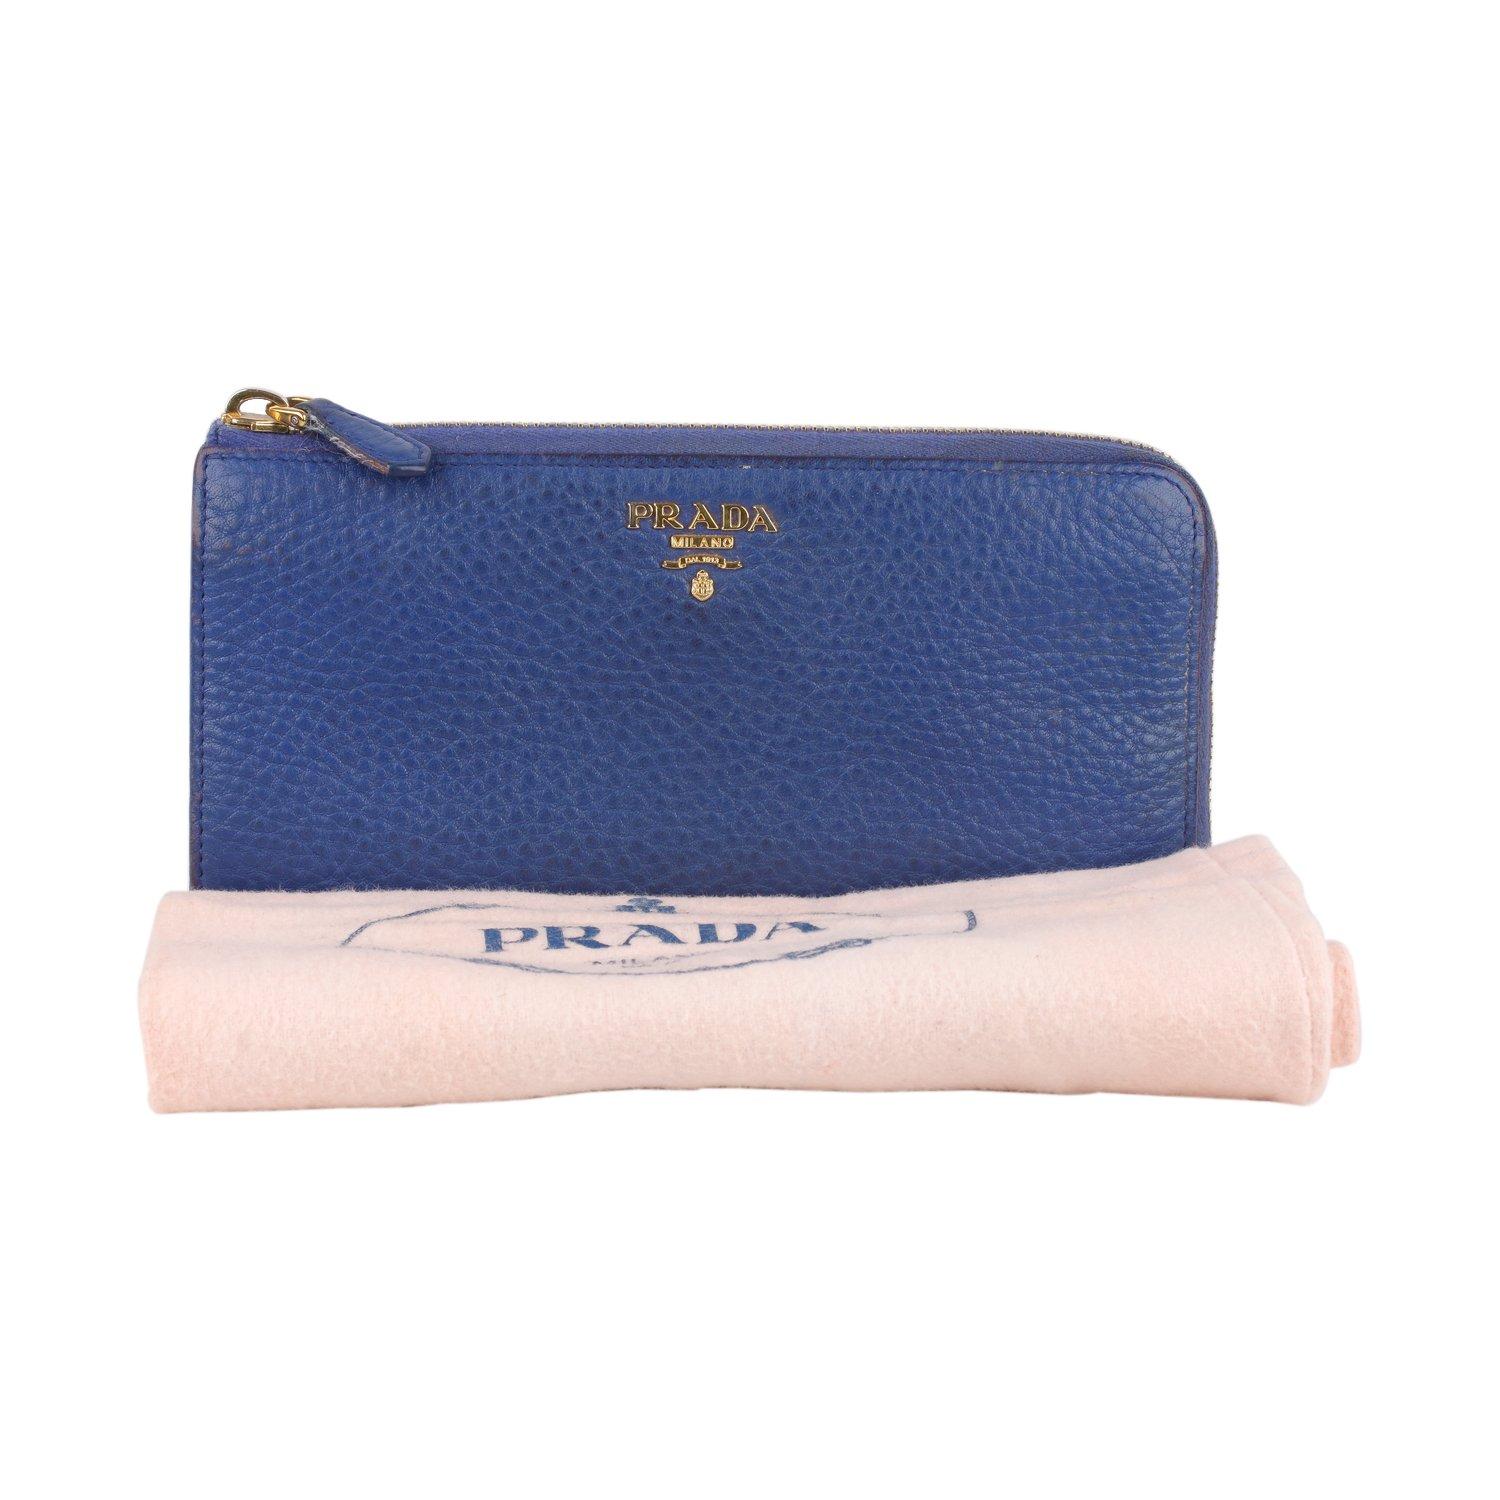 MATERIAL: Leather COLOR: Blue MODEL: Wallet GENDER: Women SIZE: Medium COUNTRY OF MANUFACTURE: Italy Condition CONDITION DETAILS: C: FAIR CONDITION - Well used, with noticeable defects - This item has some visible wear of use, please READ CAREFULLY